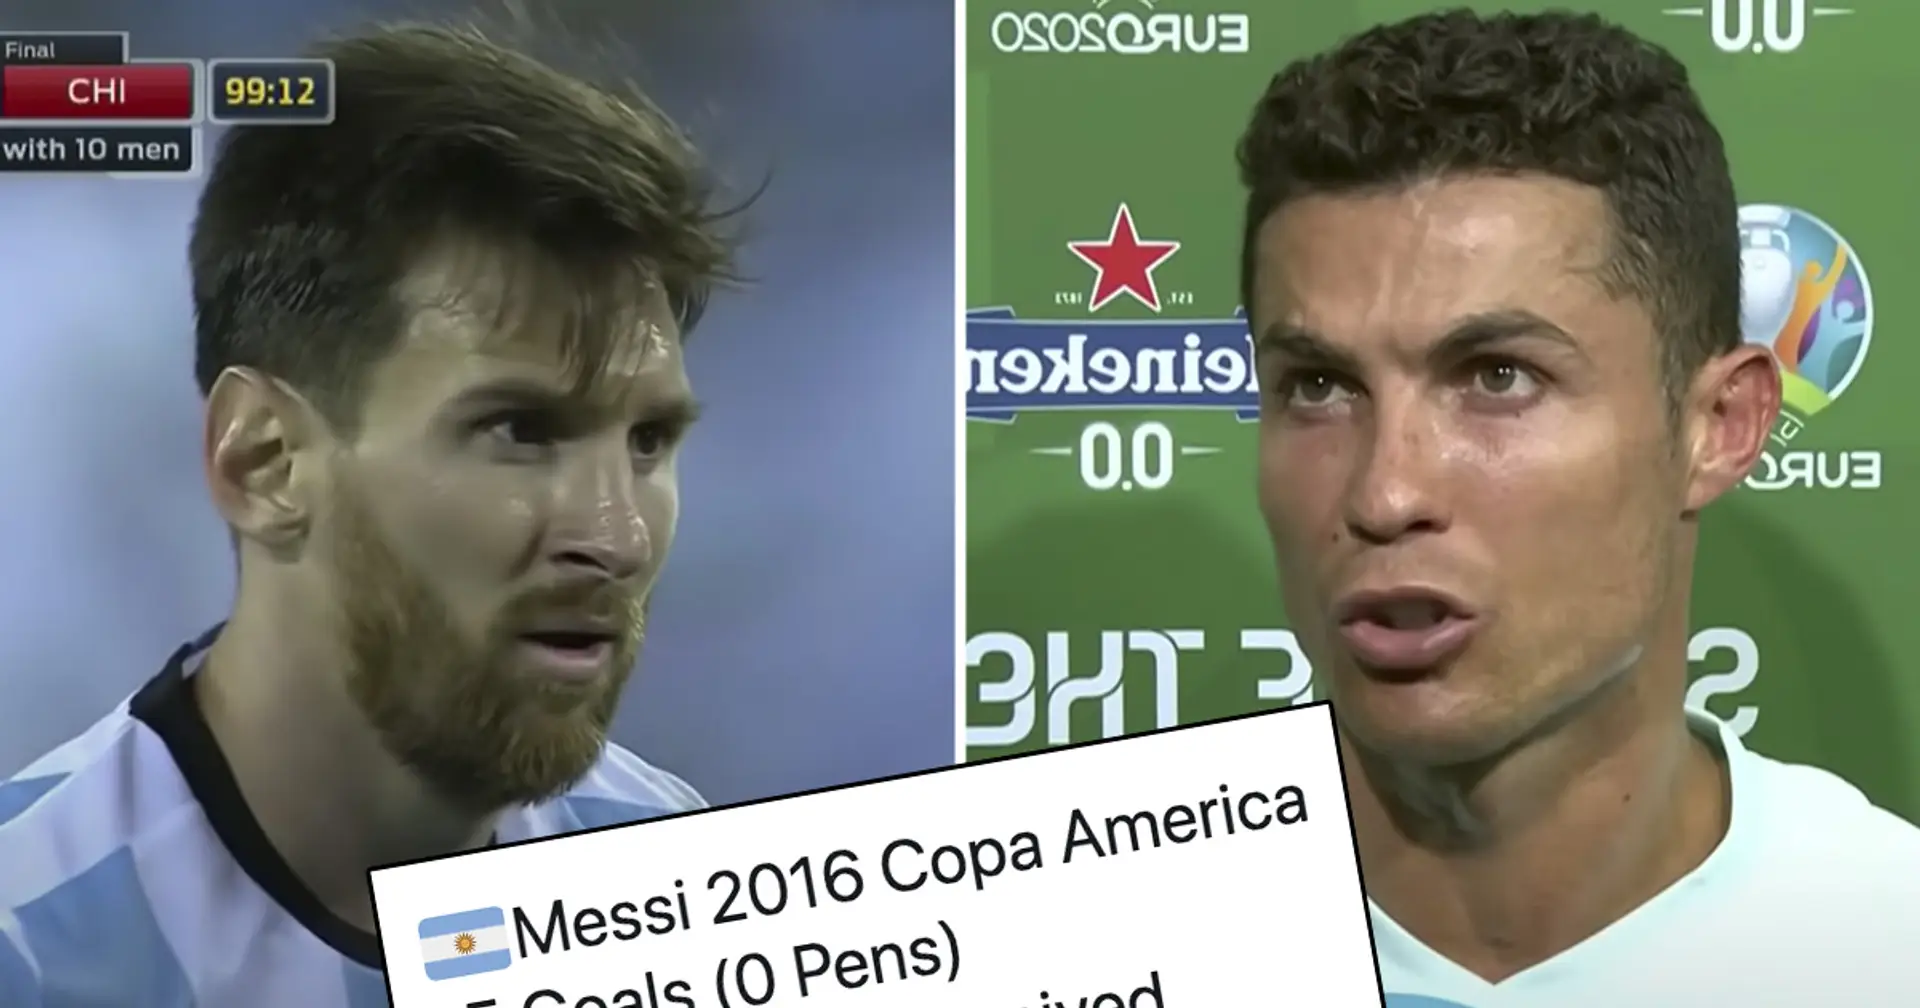 Messi and Ronaldo scored 5 goals at international tournament just once – but which record is better?